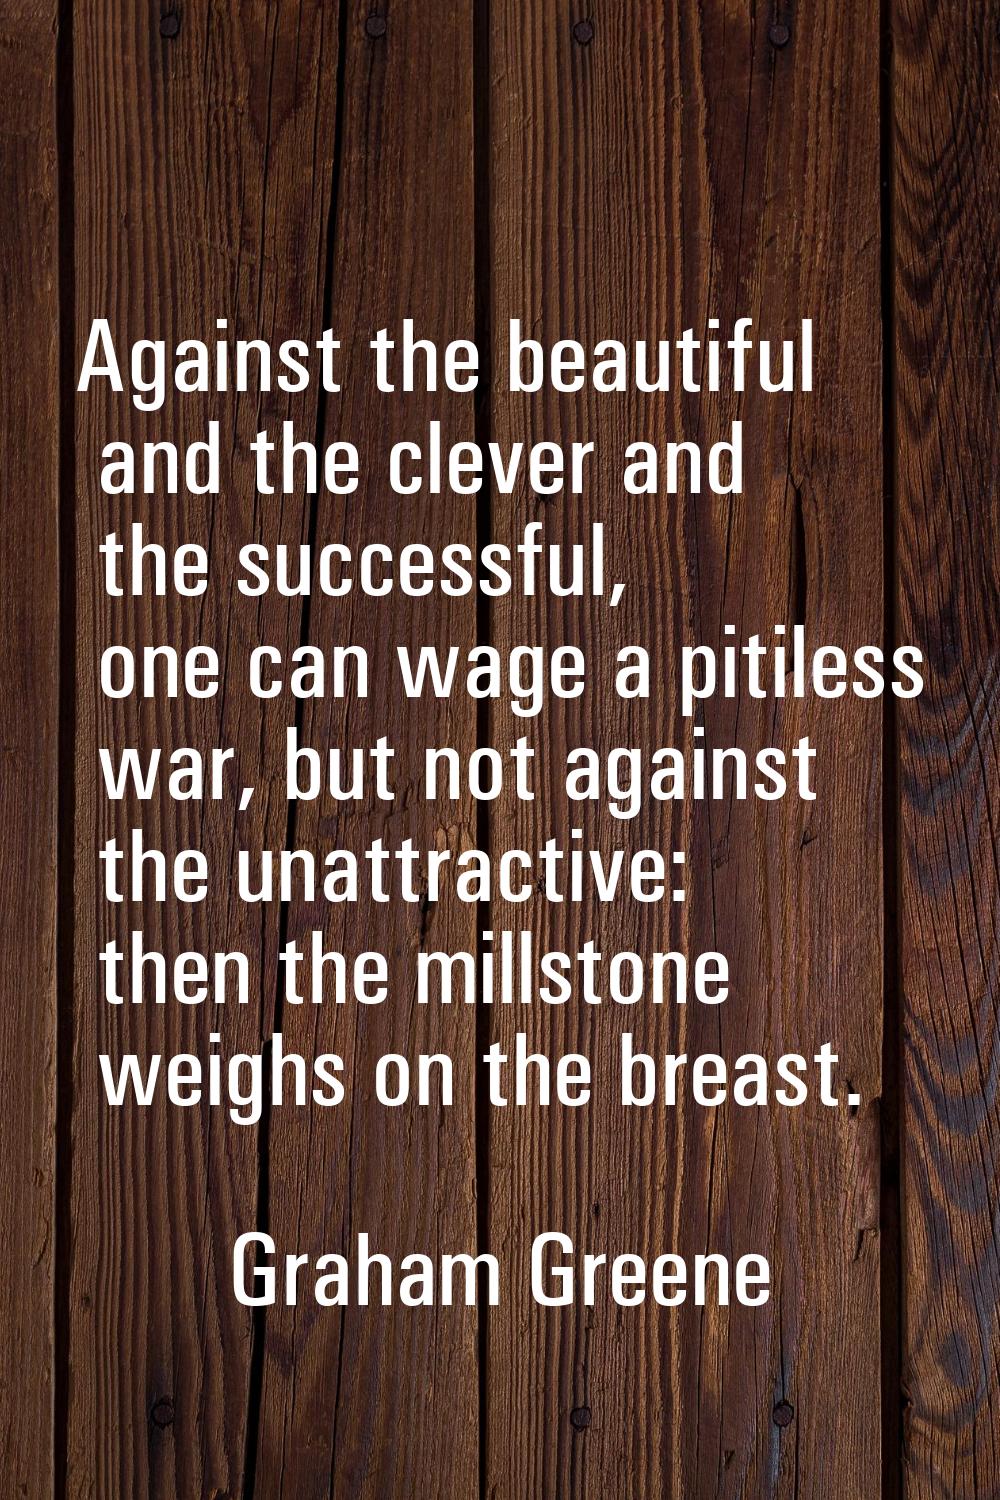 Against the beautiful and the clever and the successful, one can wage a pitiless war, but not again